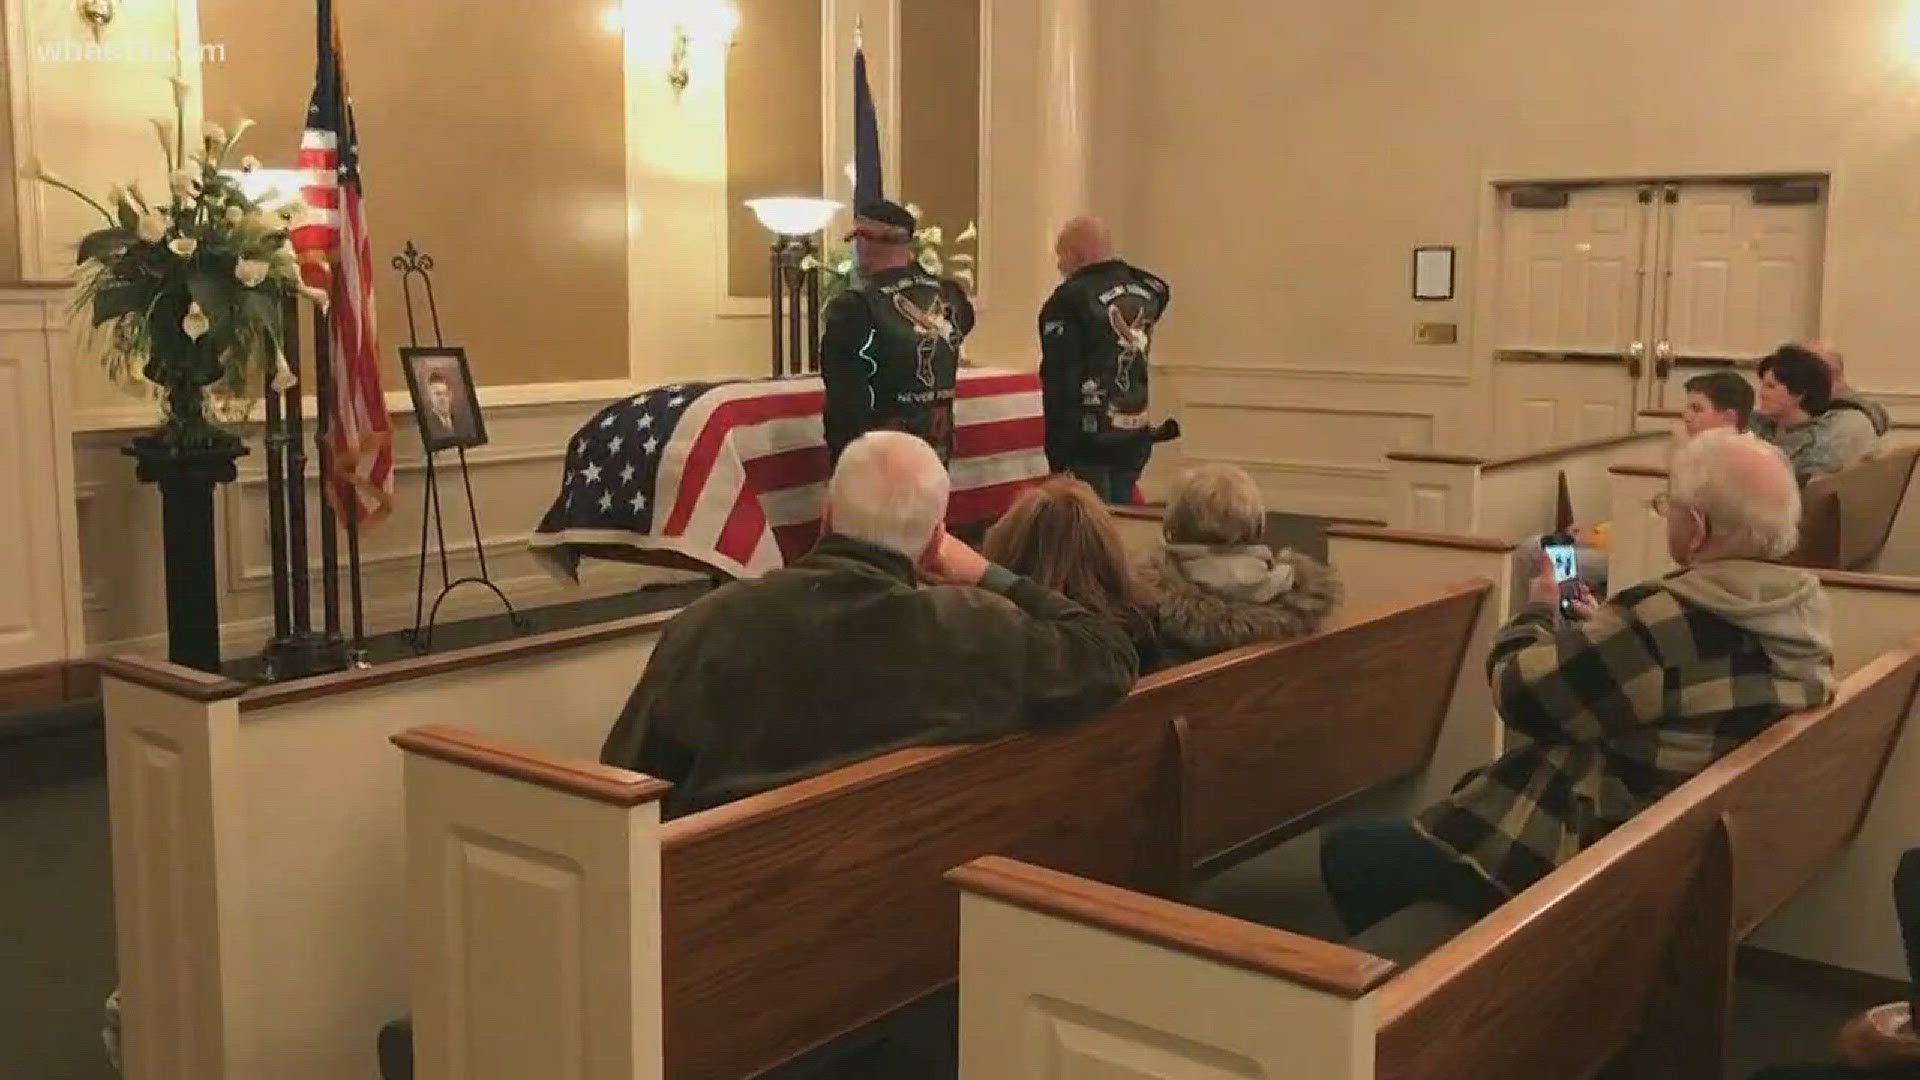 76 years after Pearl Harbor attack, sailor's remains return home